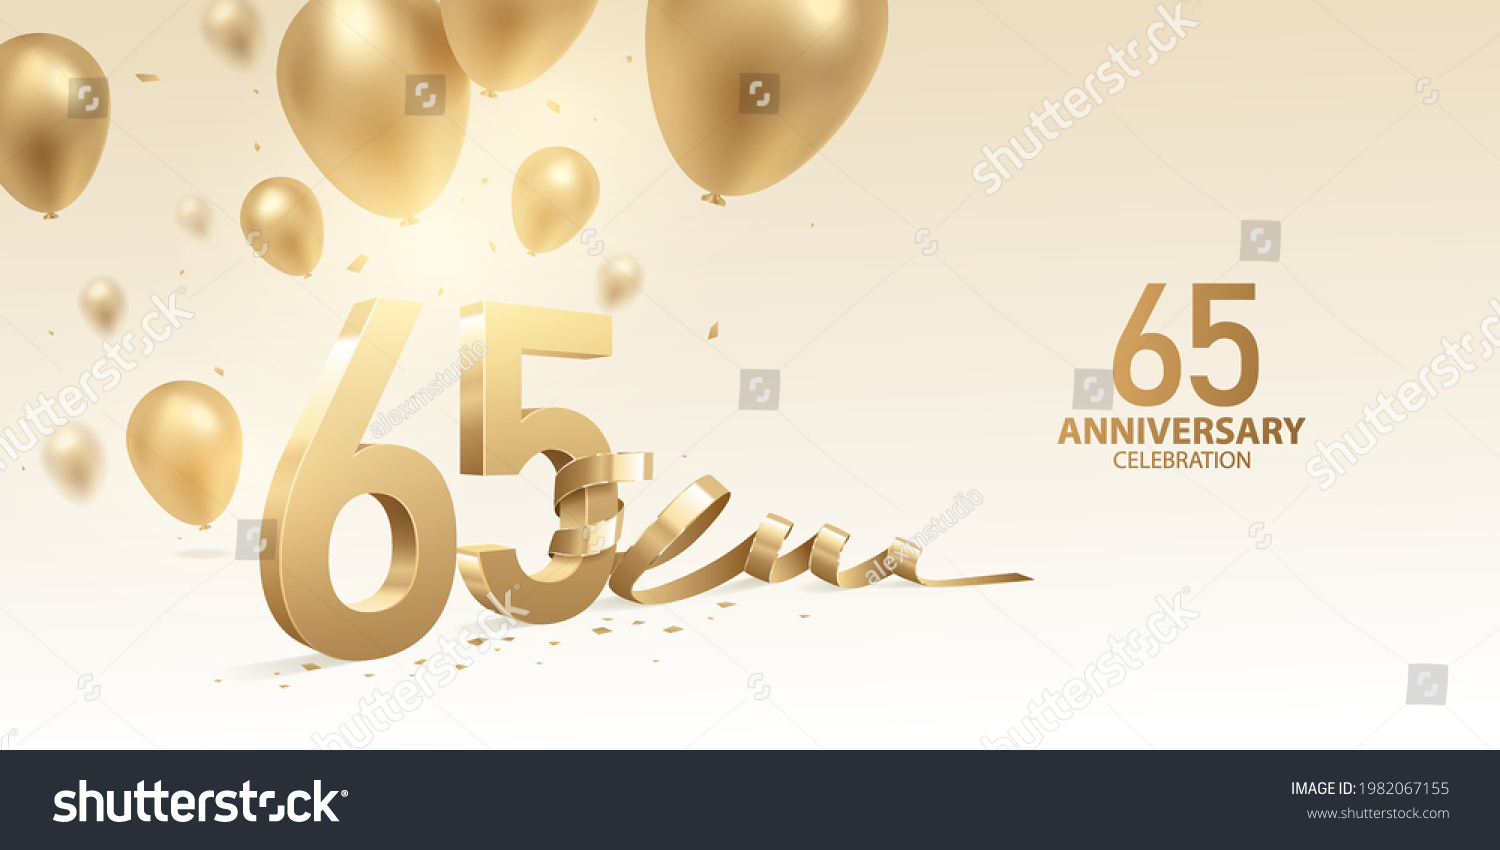 65th Anniversary Celebration Background 3d Golden Stock Vector (Royalty ...